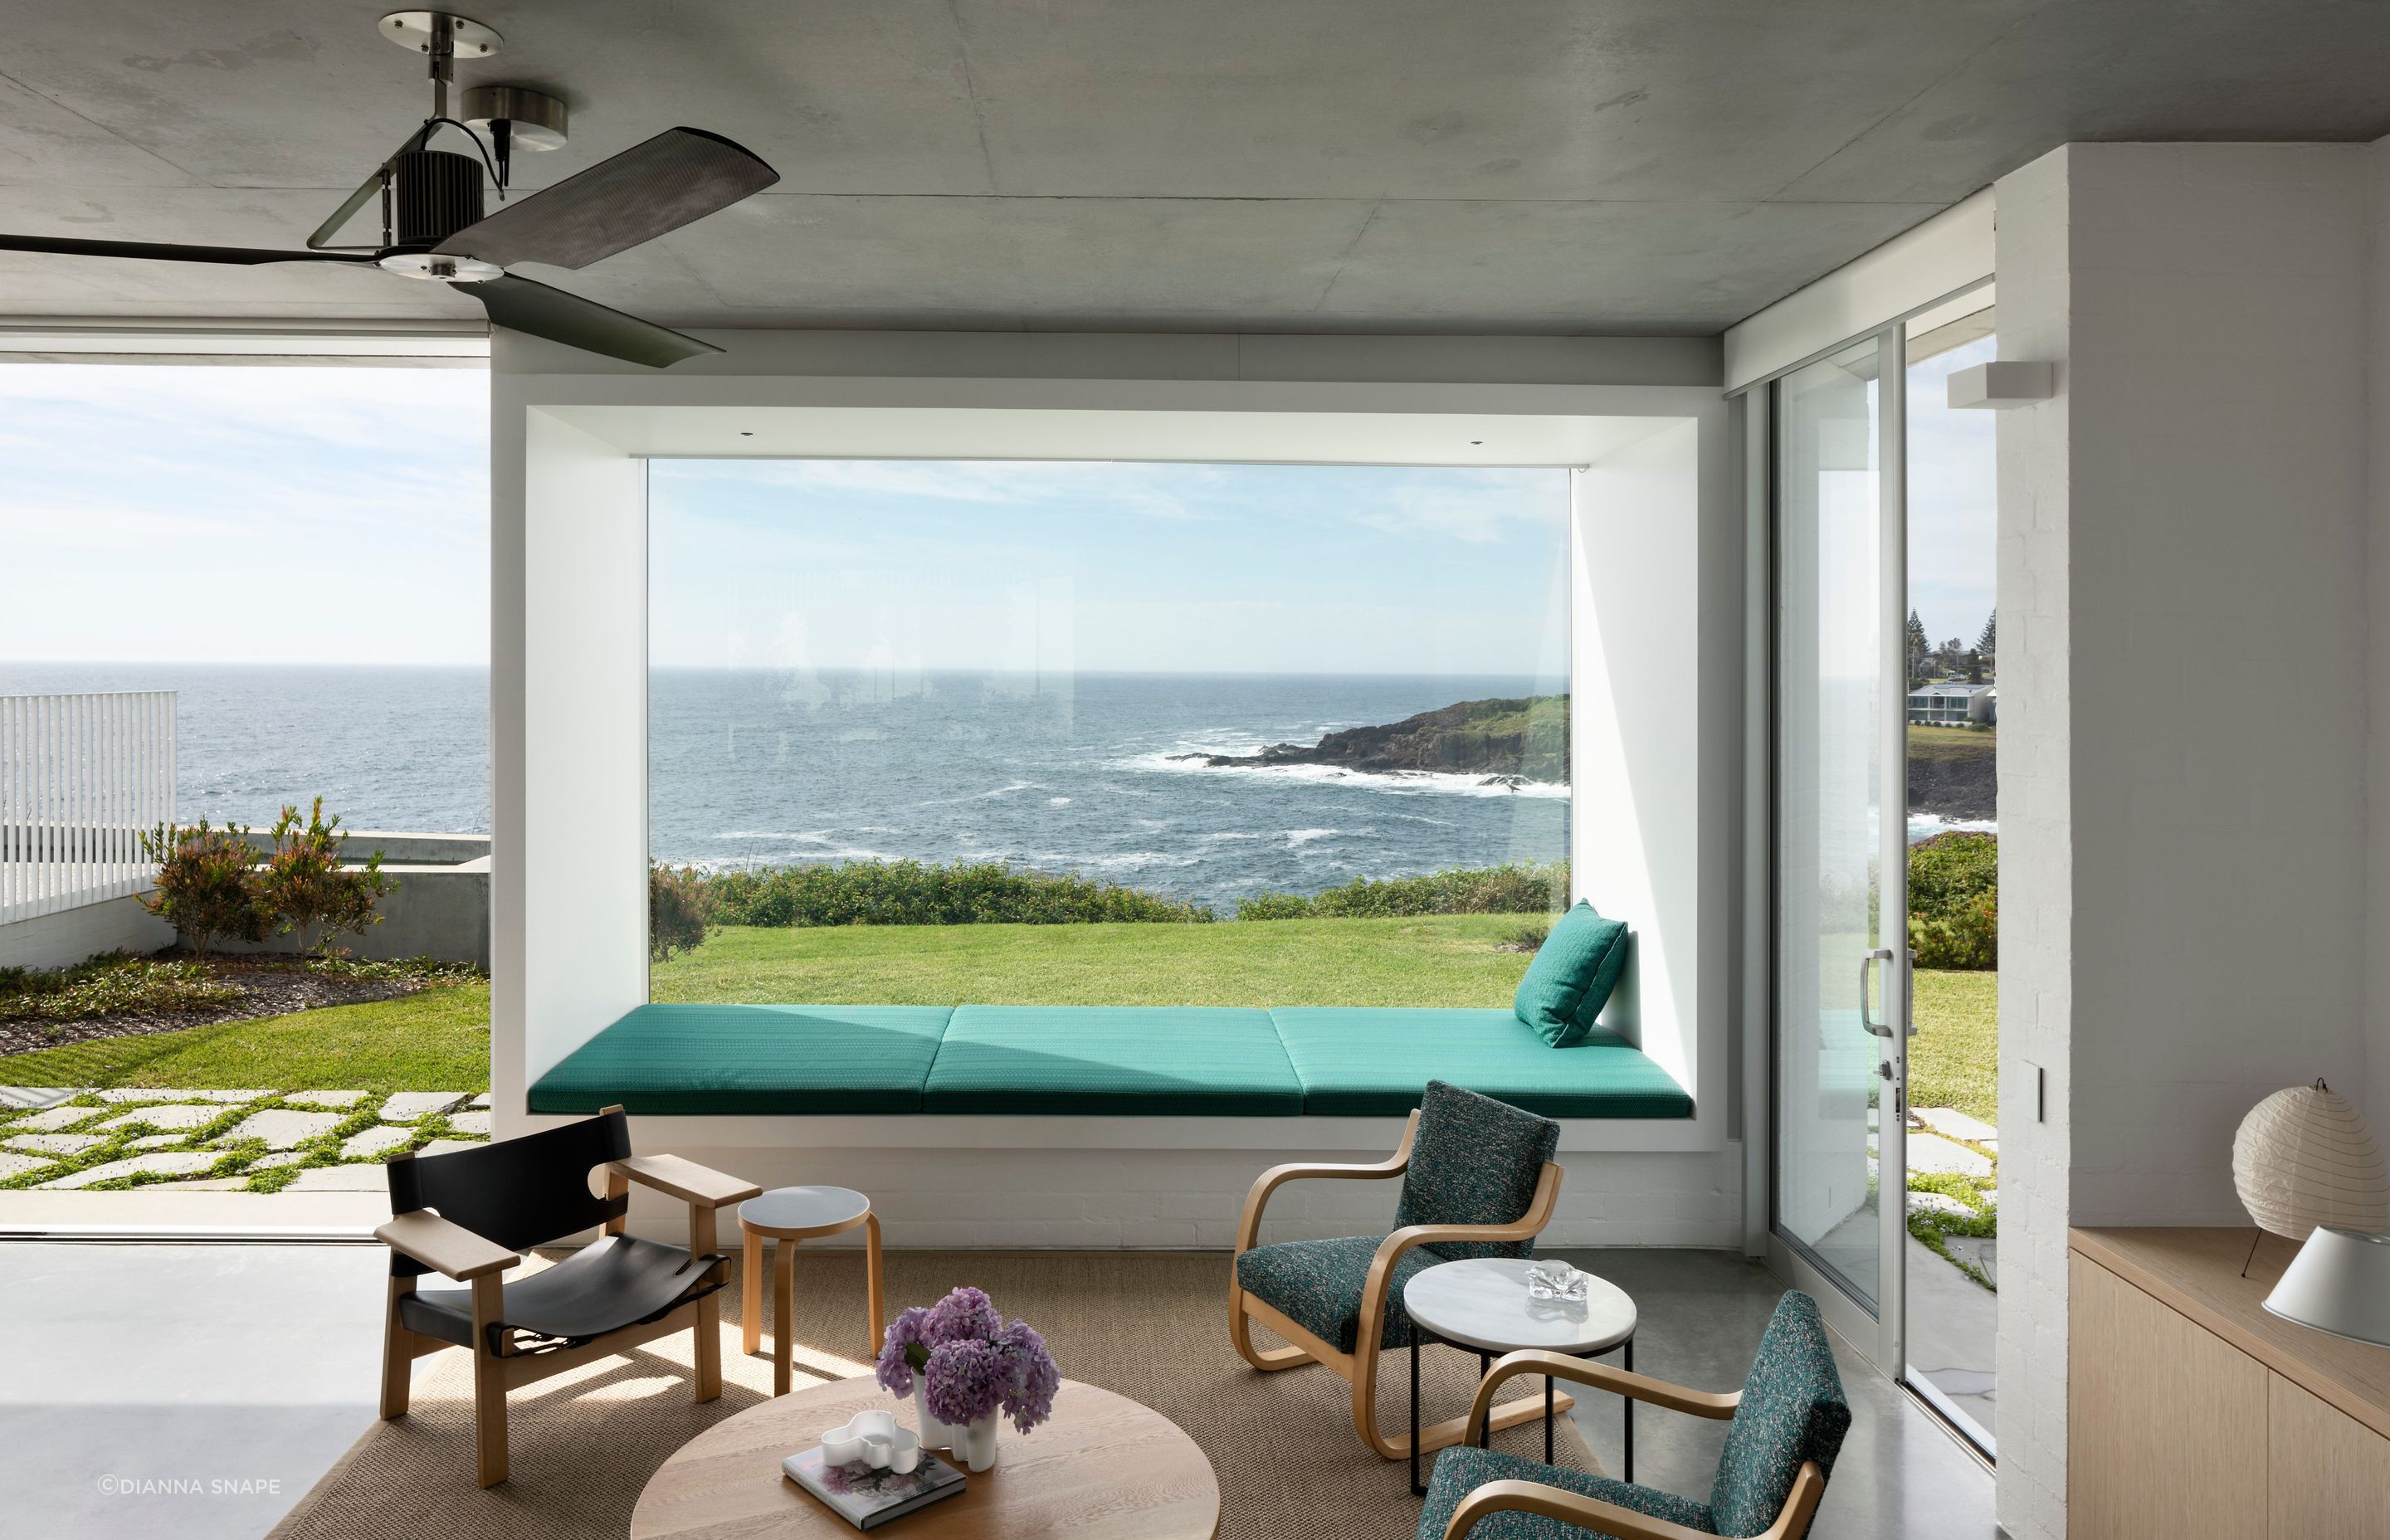 In the sunken lounge a built-in daybed is the perfect spot to enjoy the wild storms that frequently pass through.